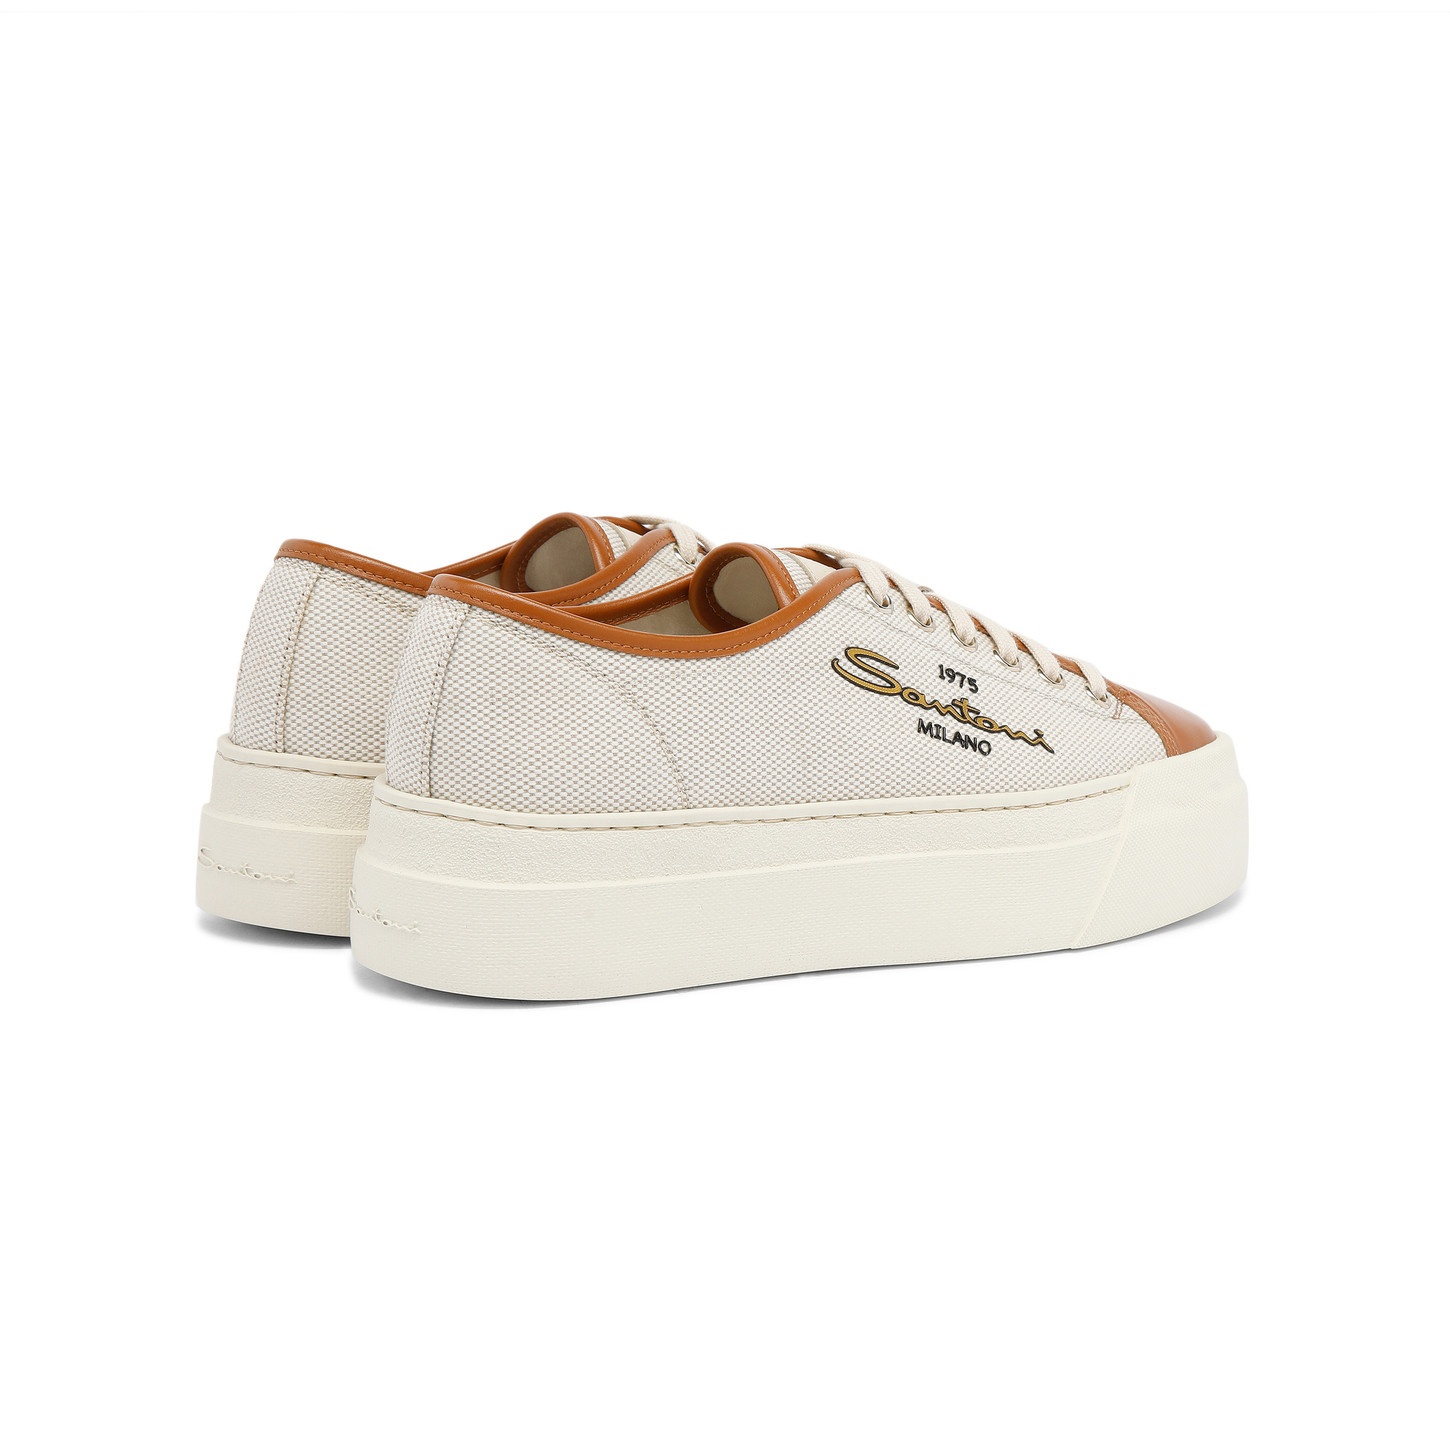 Women's brown canvas and leather platform sneaker - 4